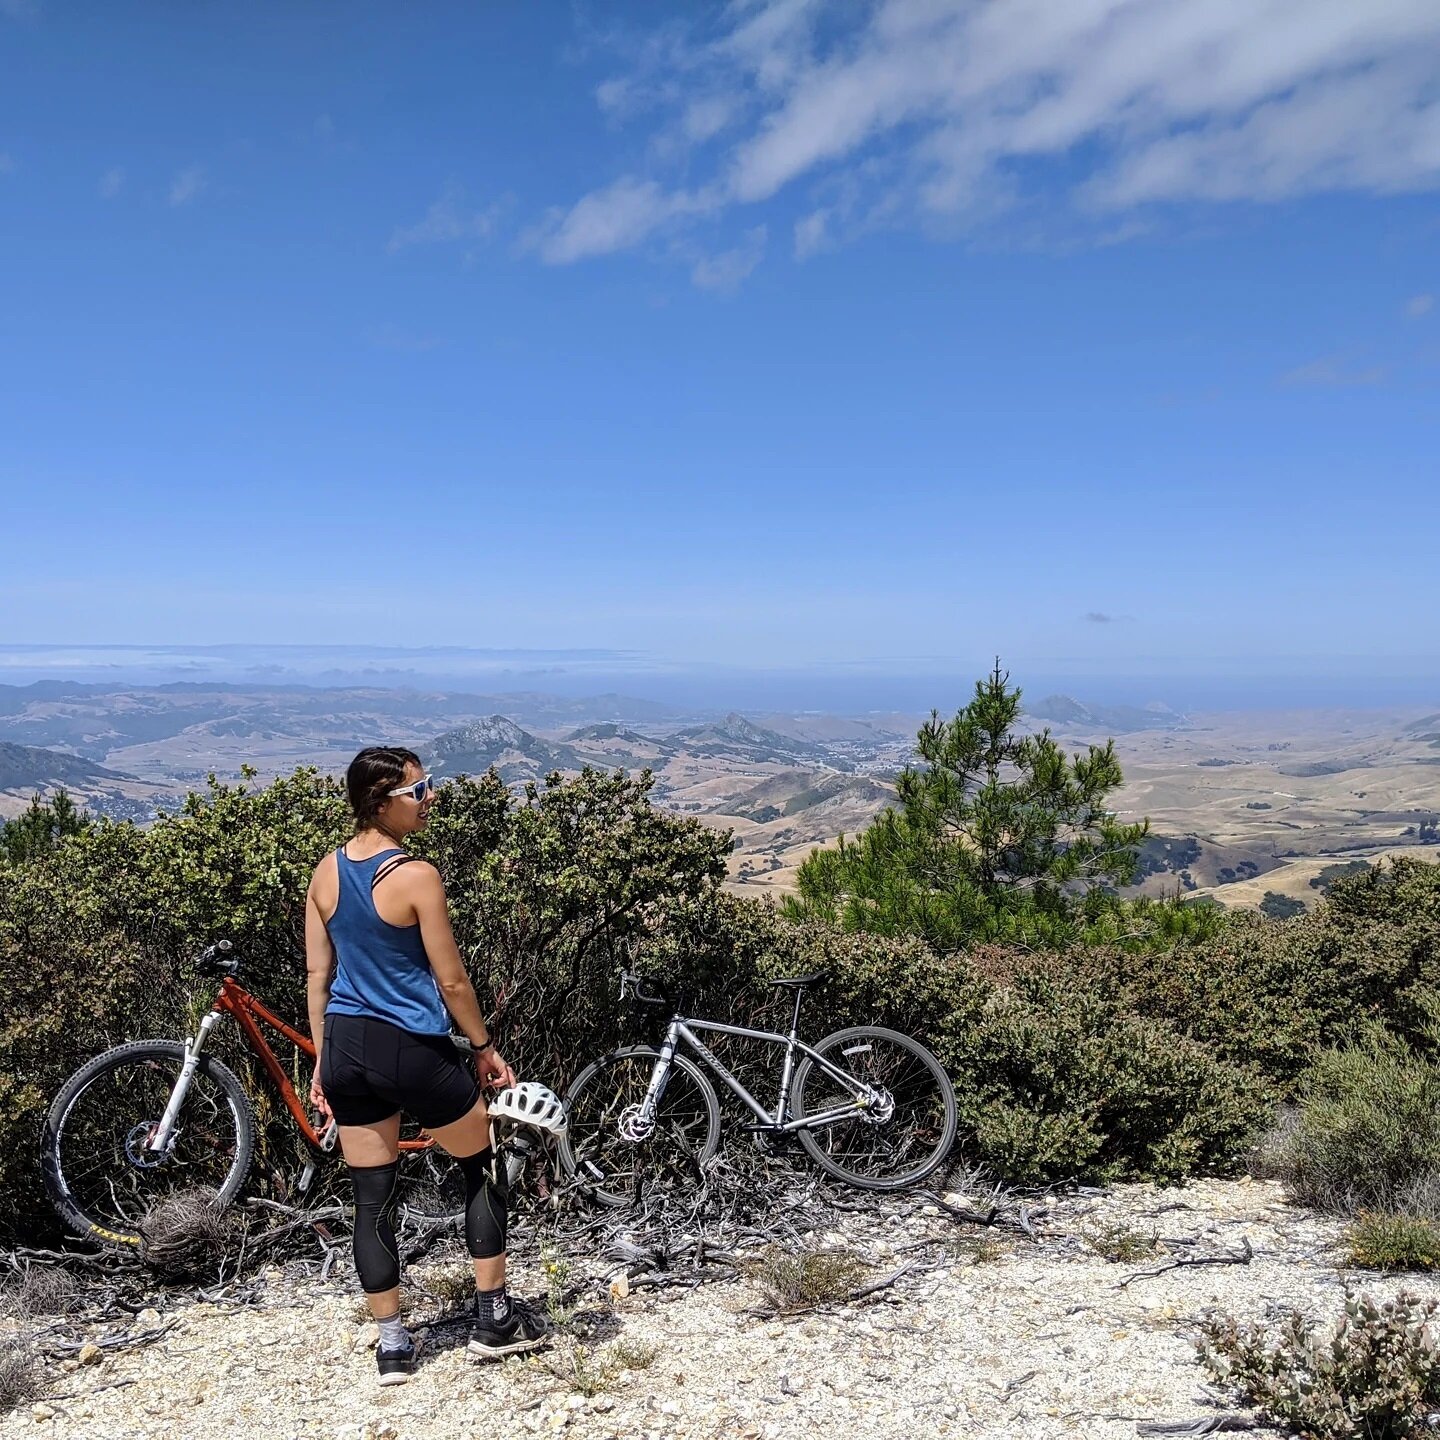 What do bike shorts and body acceptance have in common?

Our bodies are like bike shorts. Let me explain:

Bike shorts are not meant to be sexy. They are tight in weird places, strangely mid-length, give your booty fluff but not form, and squeeze hip